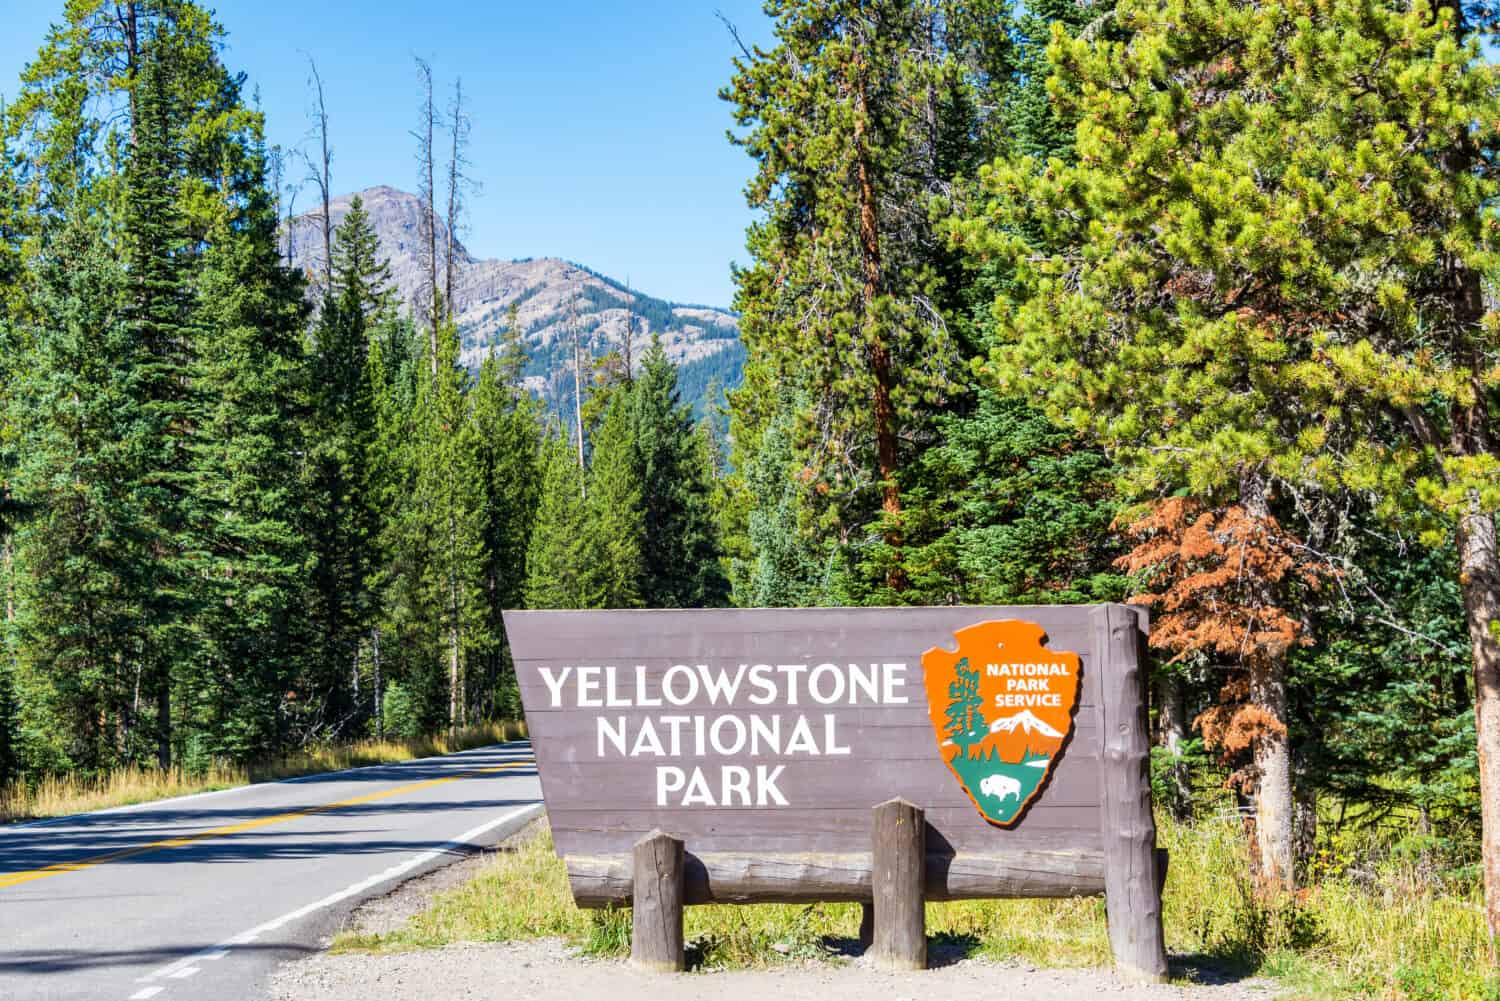 View of the entrance to Yellowstone National Park